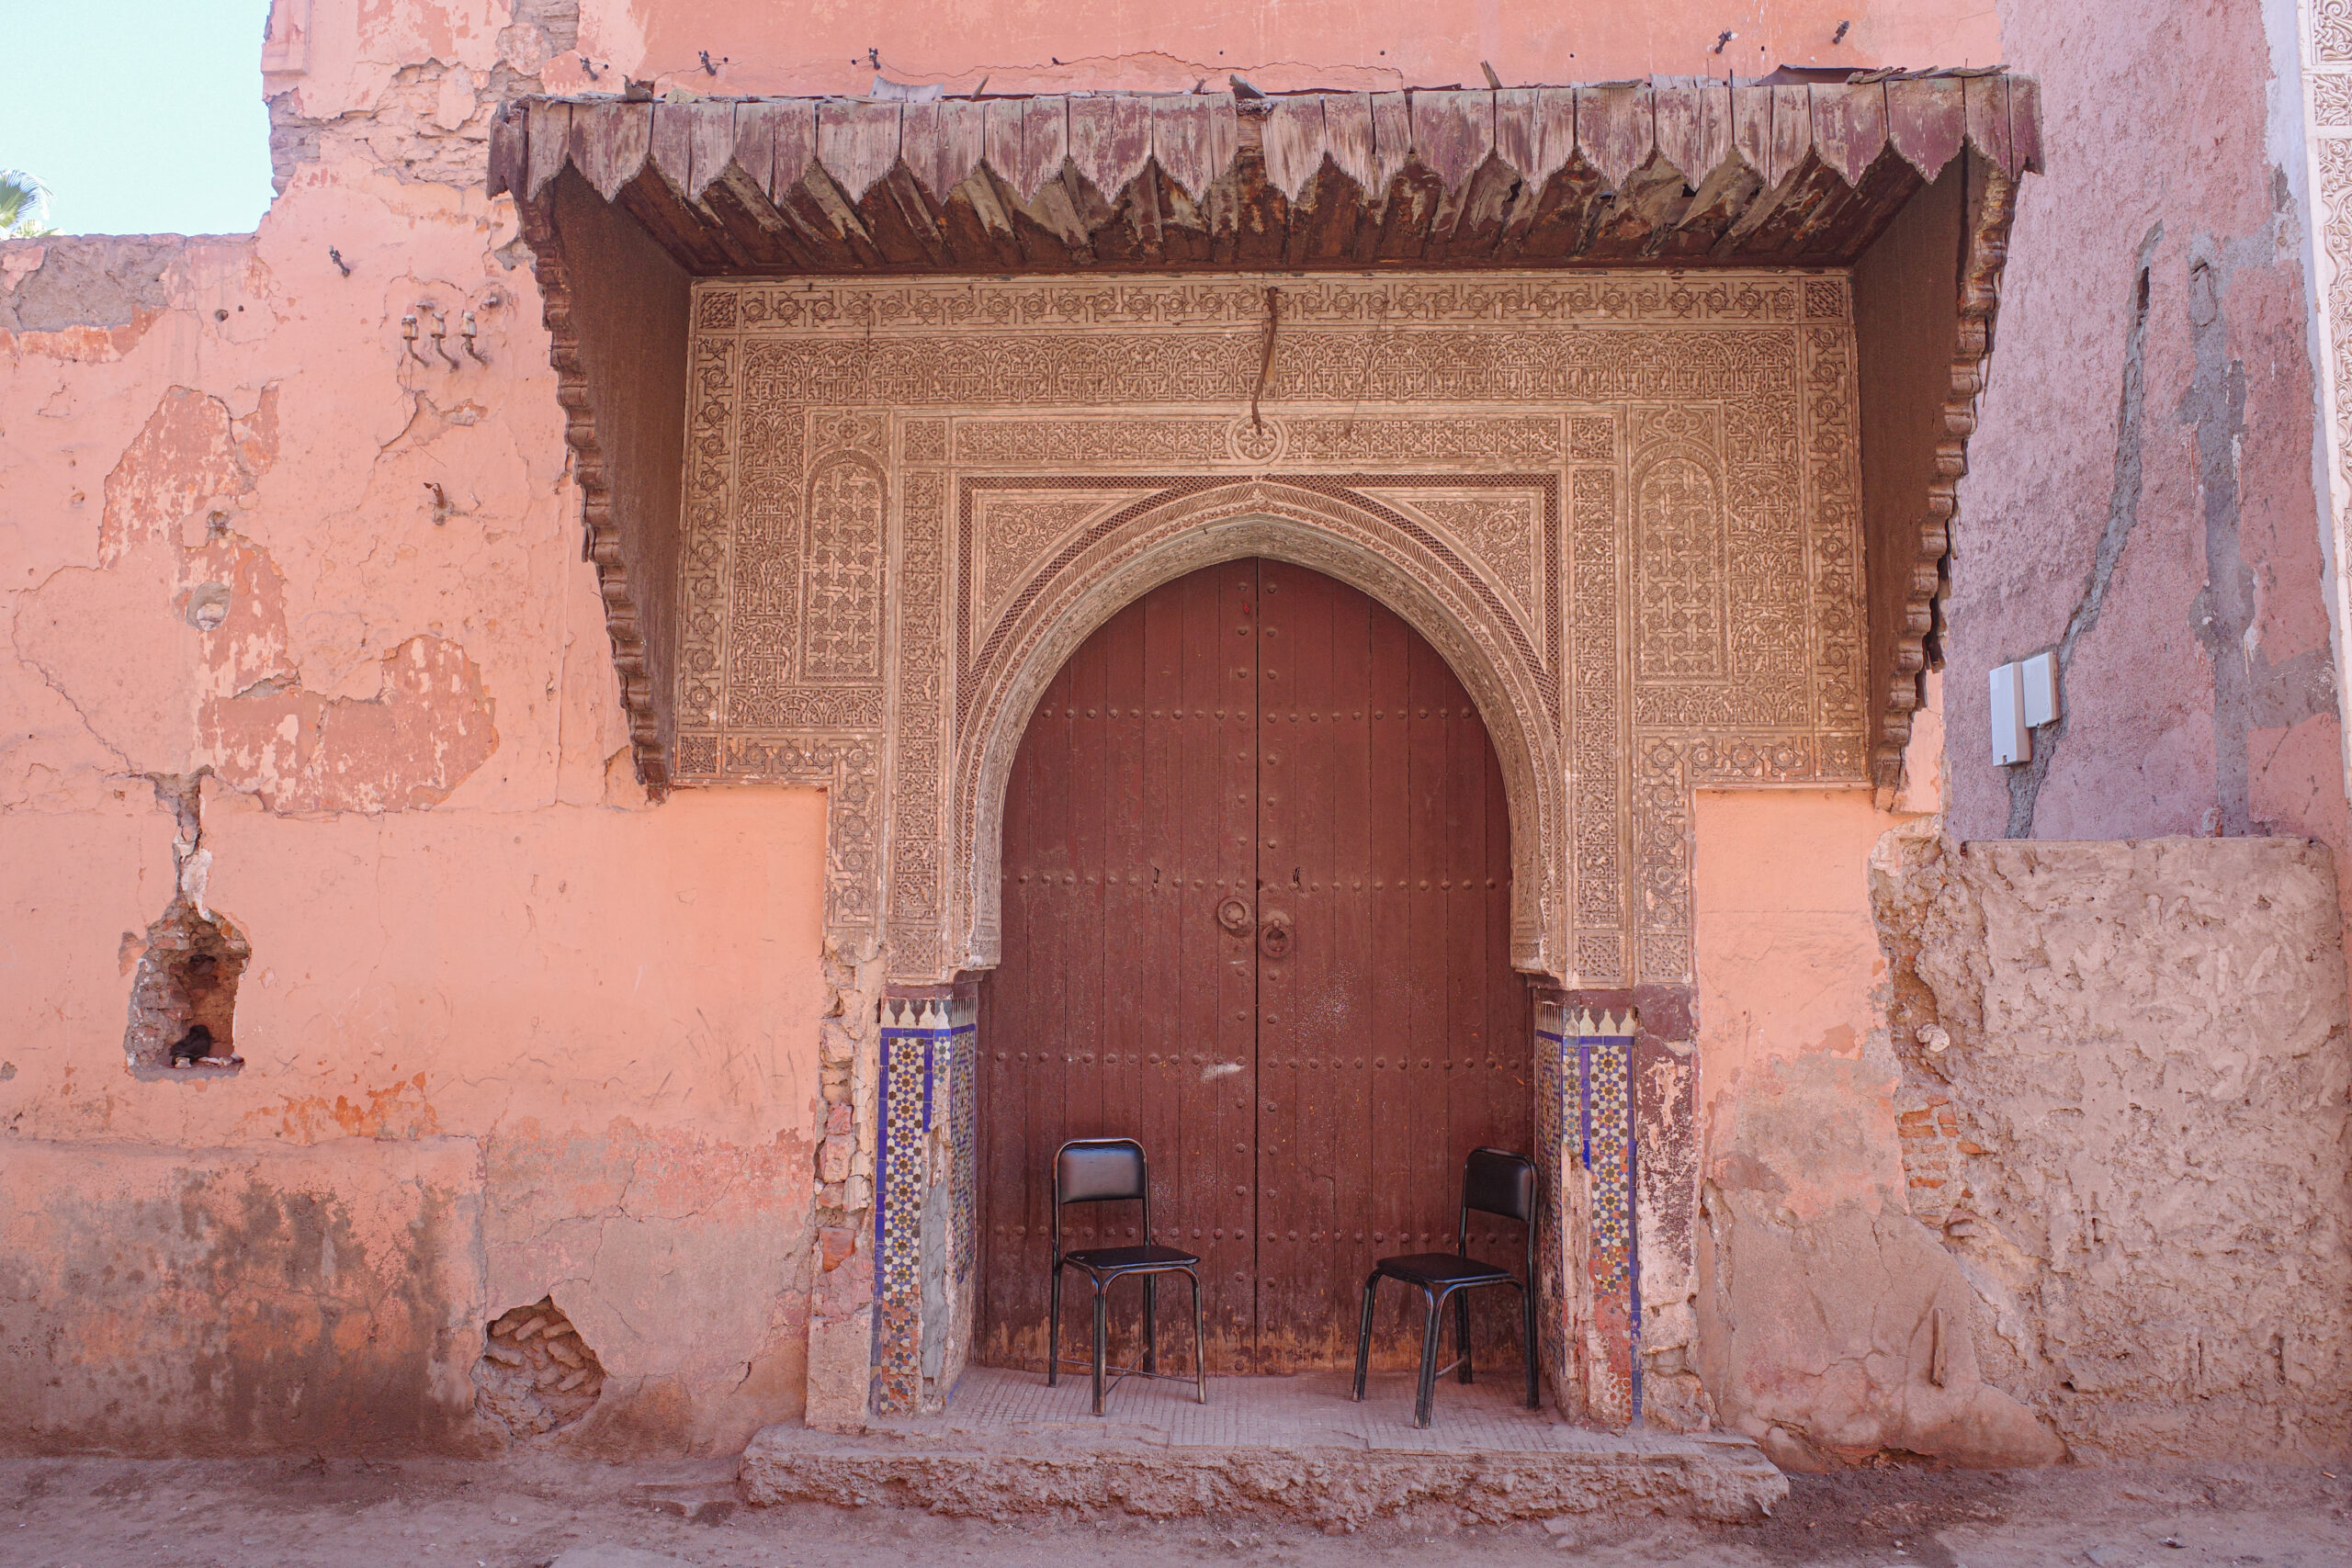 production-services-and-filming-in-marocco-arched-doorway-entrance